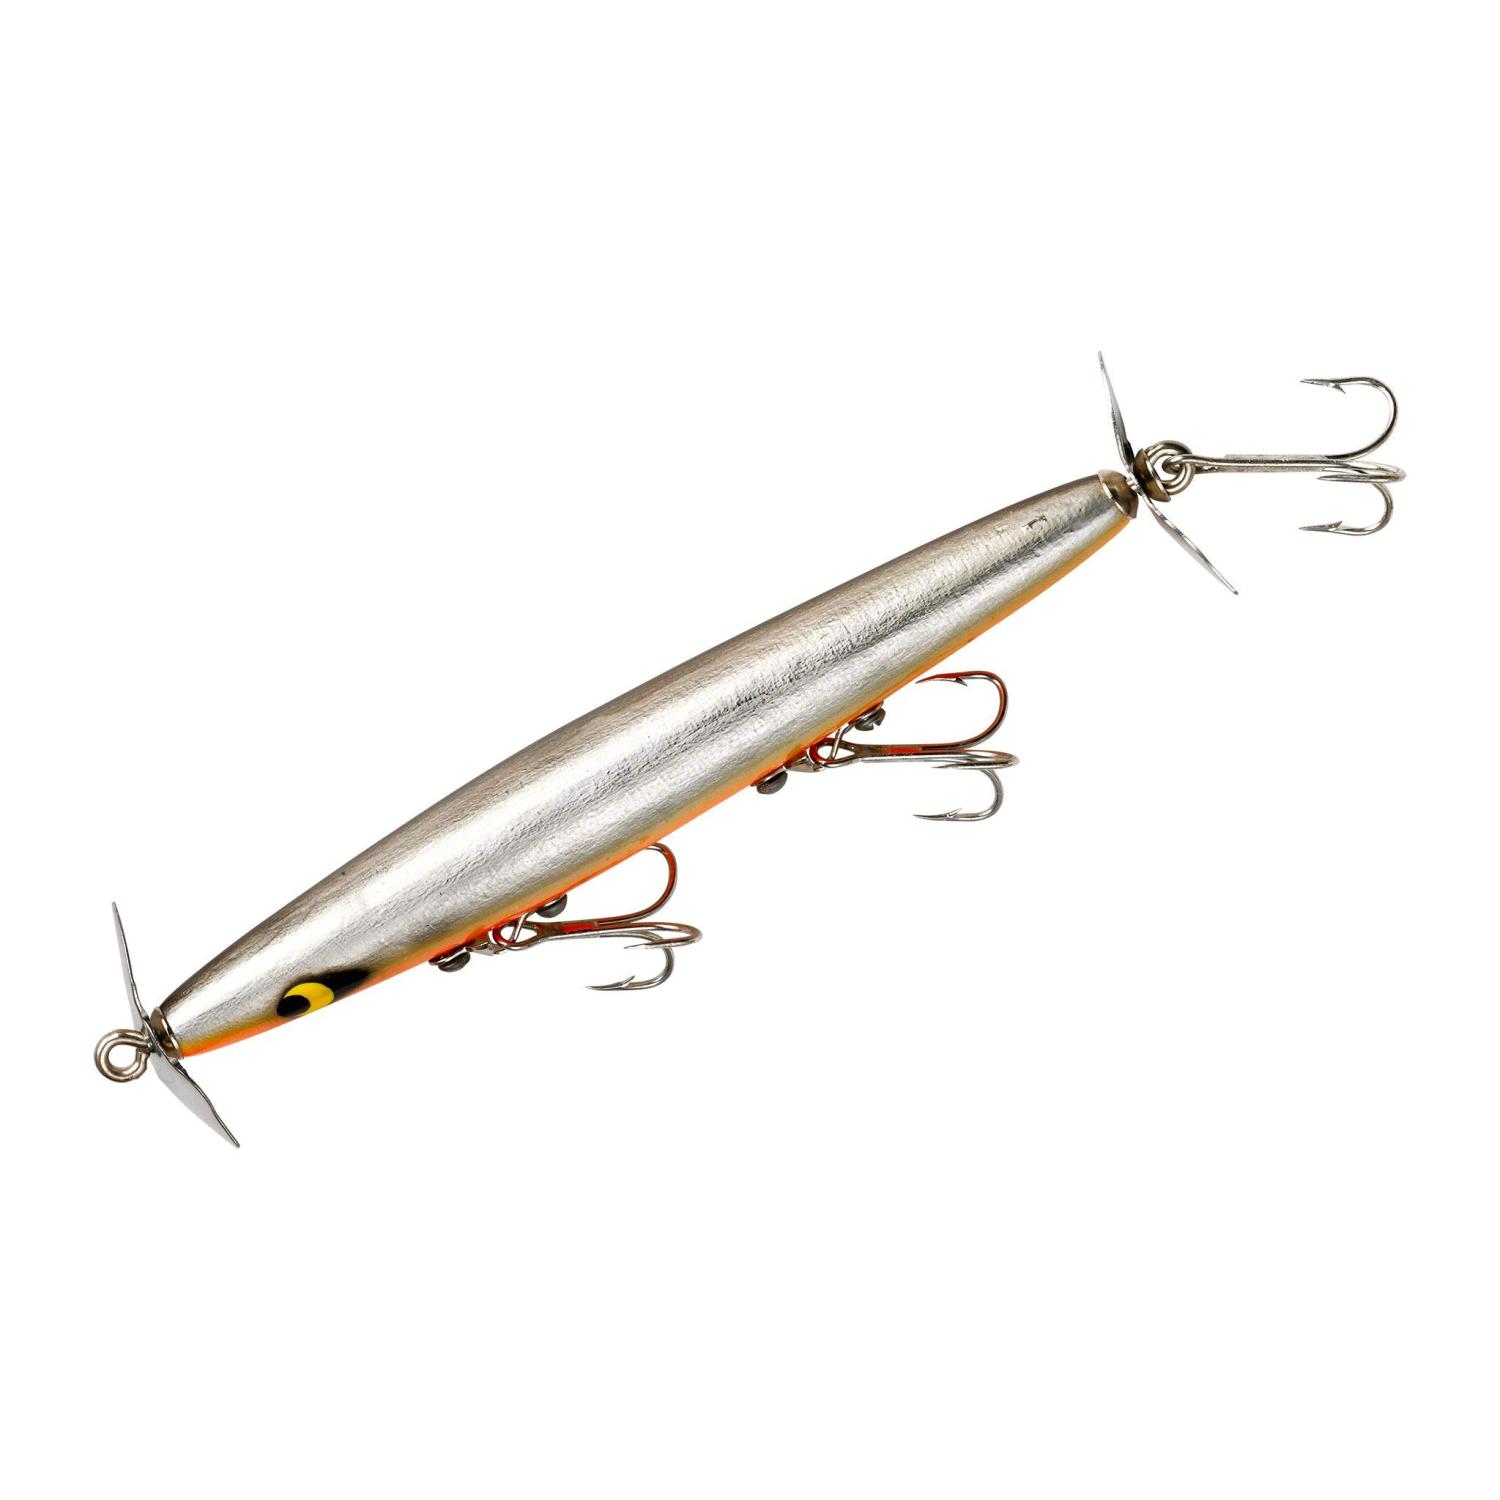 Smithwick Lures Devil's Horse Propeller Topwater Fishing Lure - Mimics  Fleeing Shad 4.5-Inch-3/8-Ounce